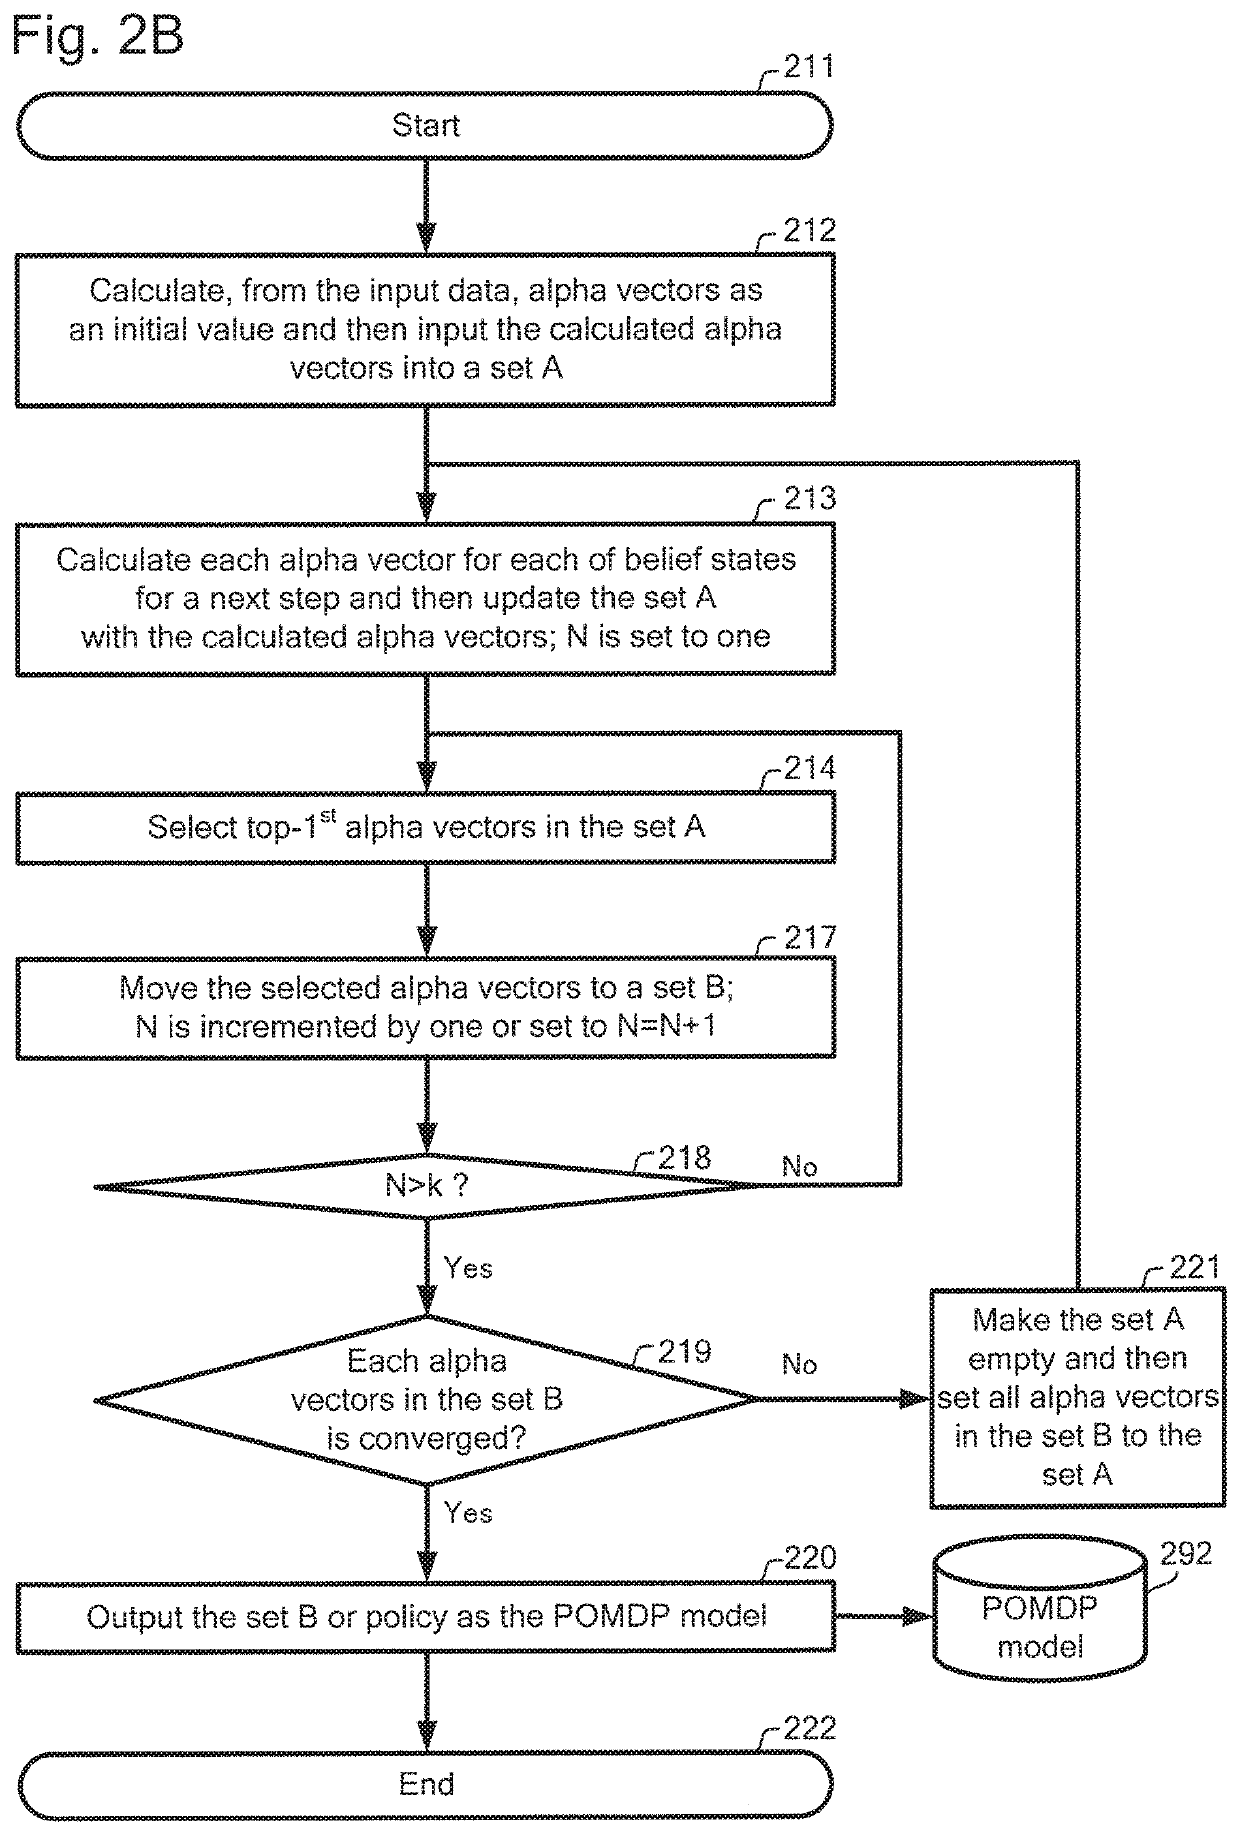 Partially observed Markov decision process model and its use